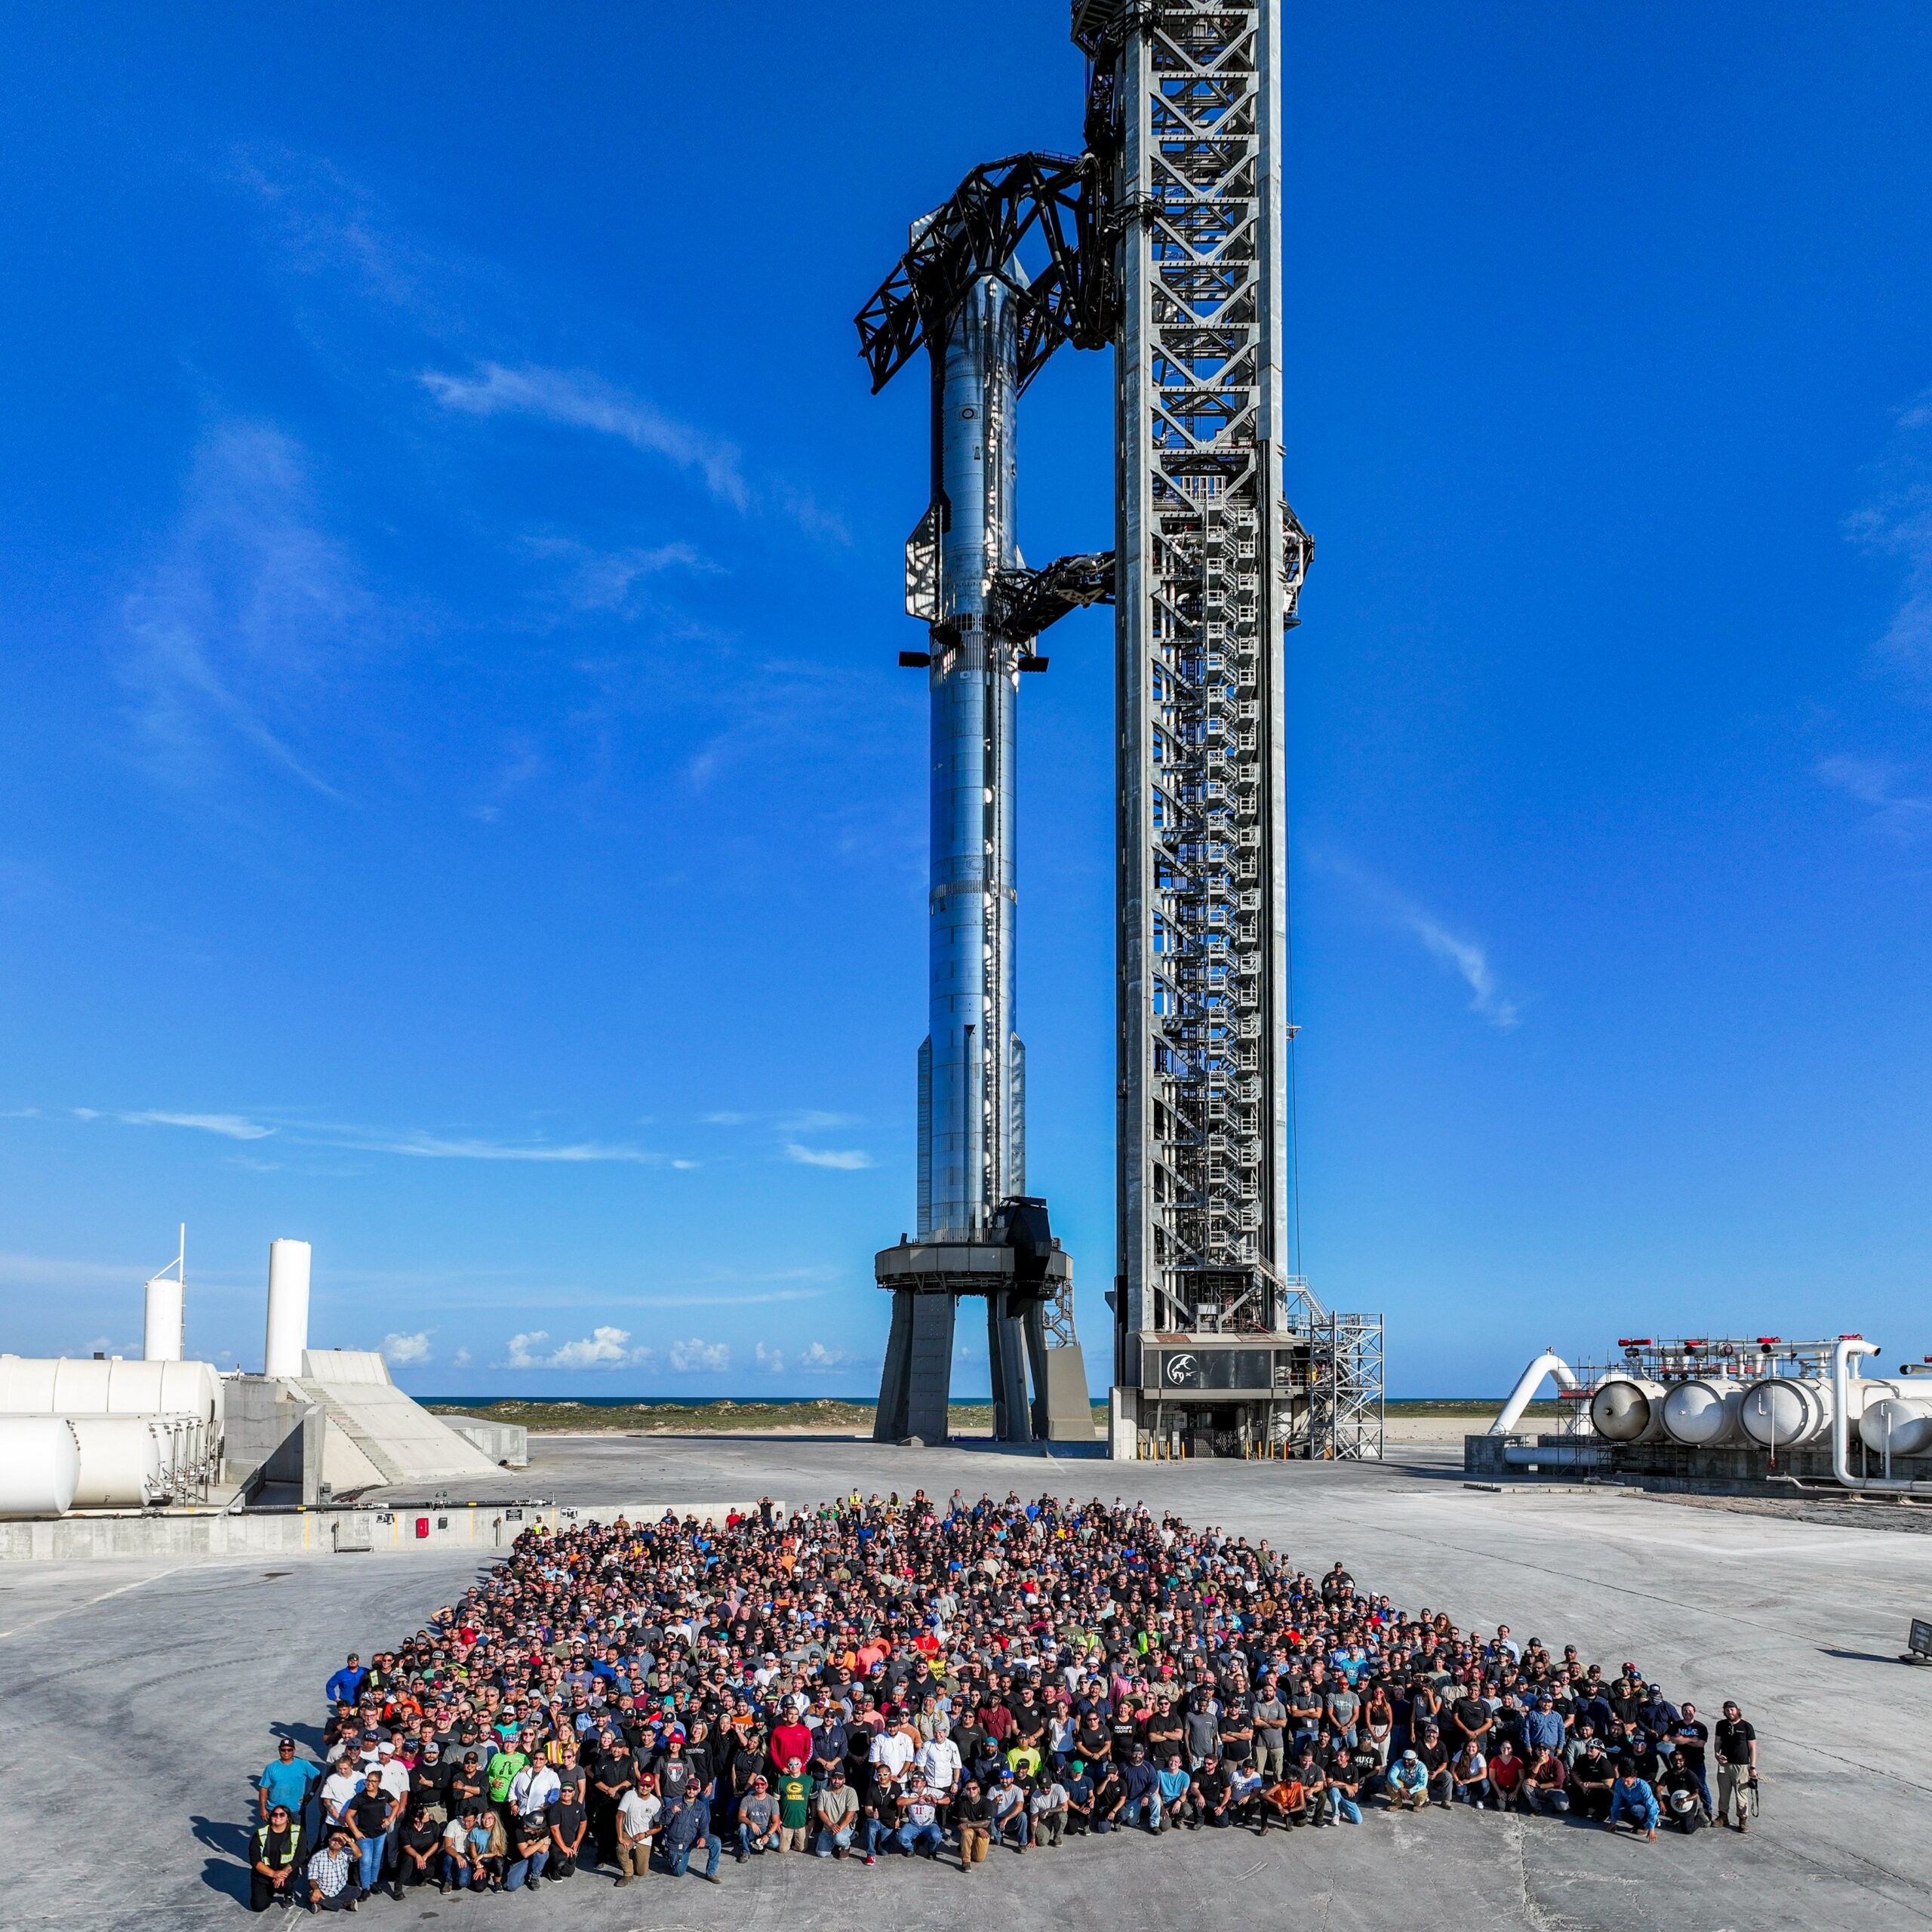 The-SpaceX-Starship-Team-group-photo-in-front-of-the-Full-Stack.-Credit-SpaceX-scaled